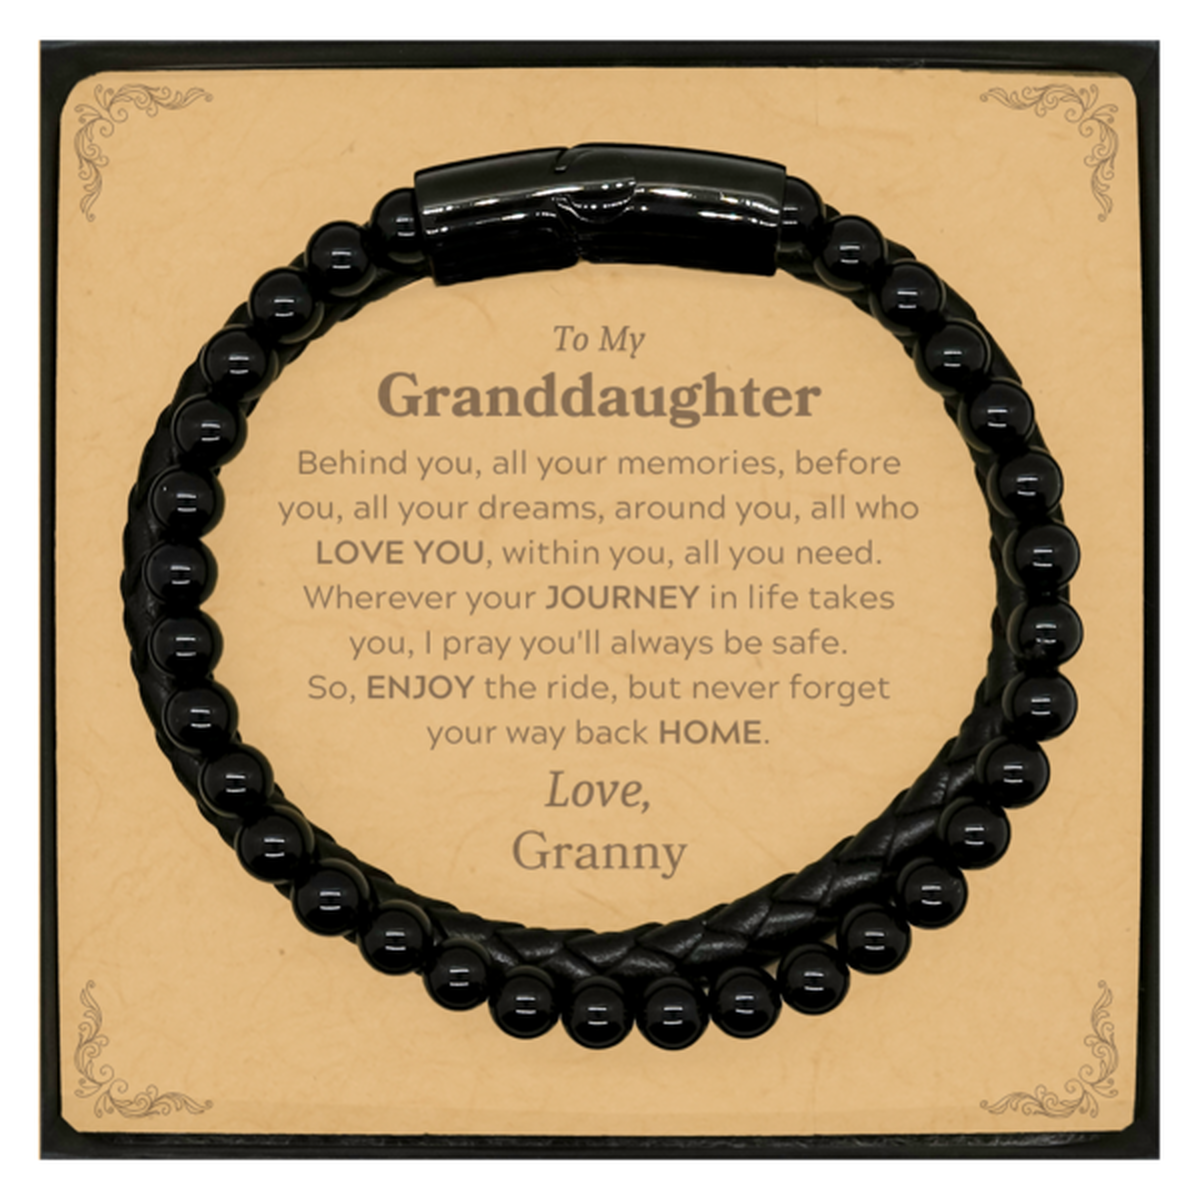 To My Granddaughter Graduation Gifts from Granny, Granddaughter Stone Leather Bracelets Christmas Birthday Gifts for Granddaughter Behind you, all your memories, before you, all your dreams. Love, Granny